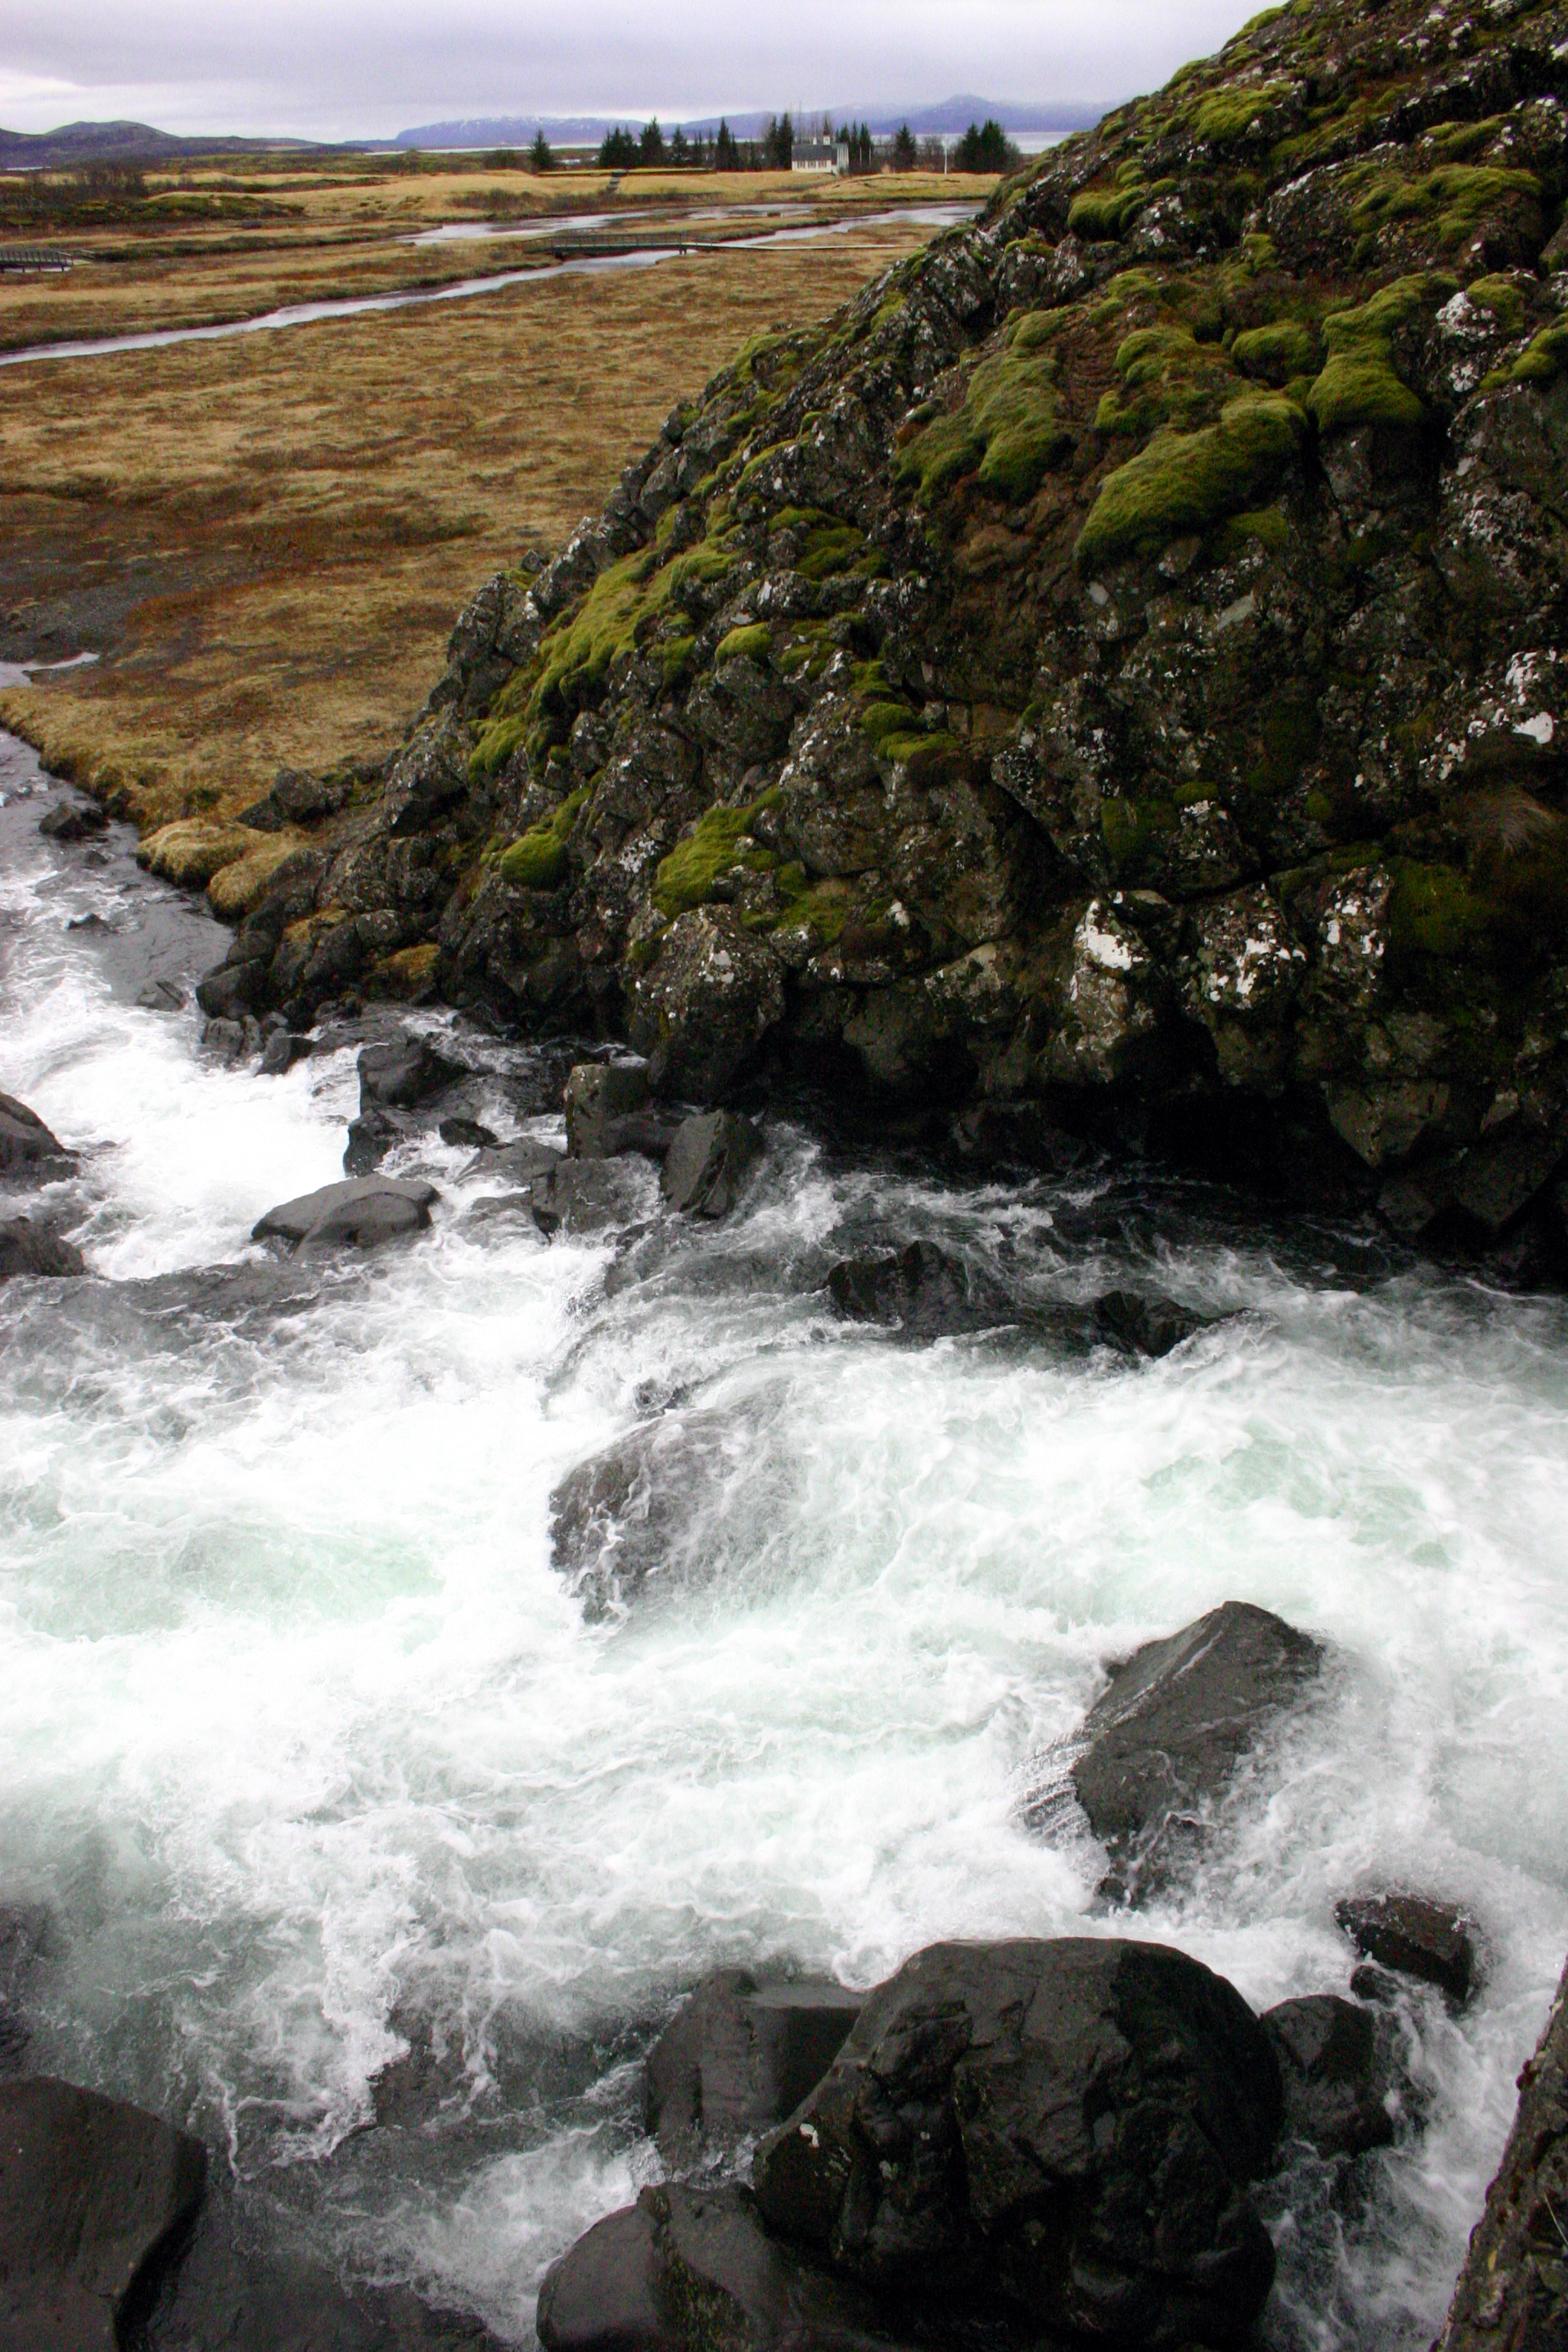 Waterfall that criminal women used to be executed in (ingvellir national park)